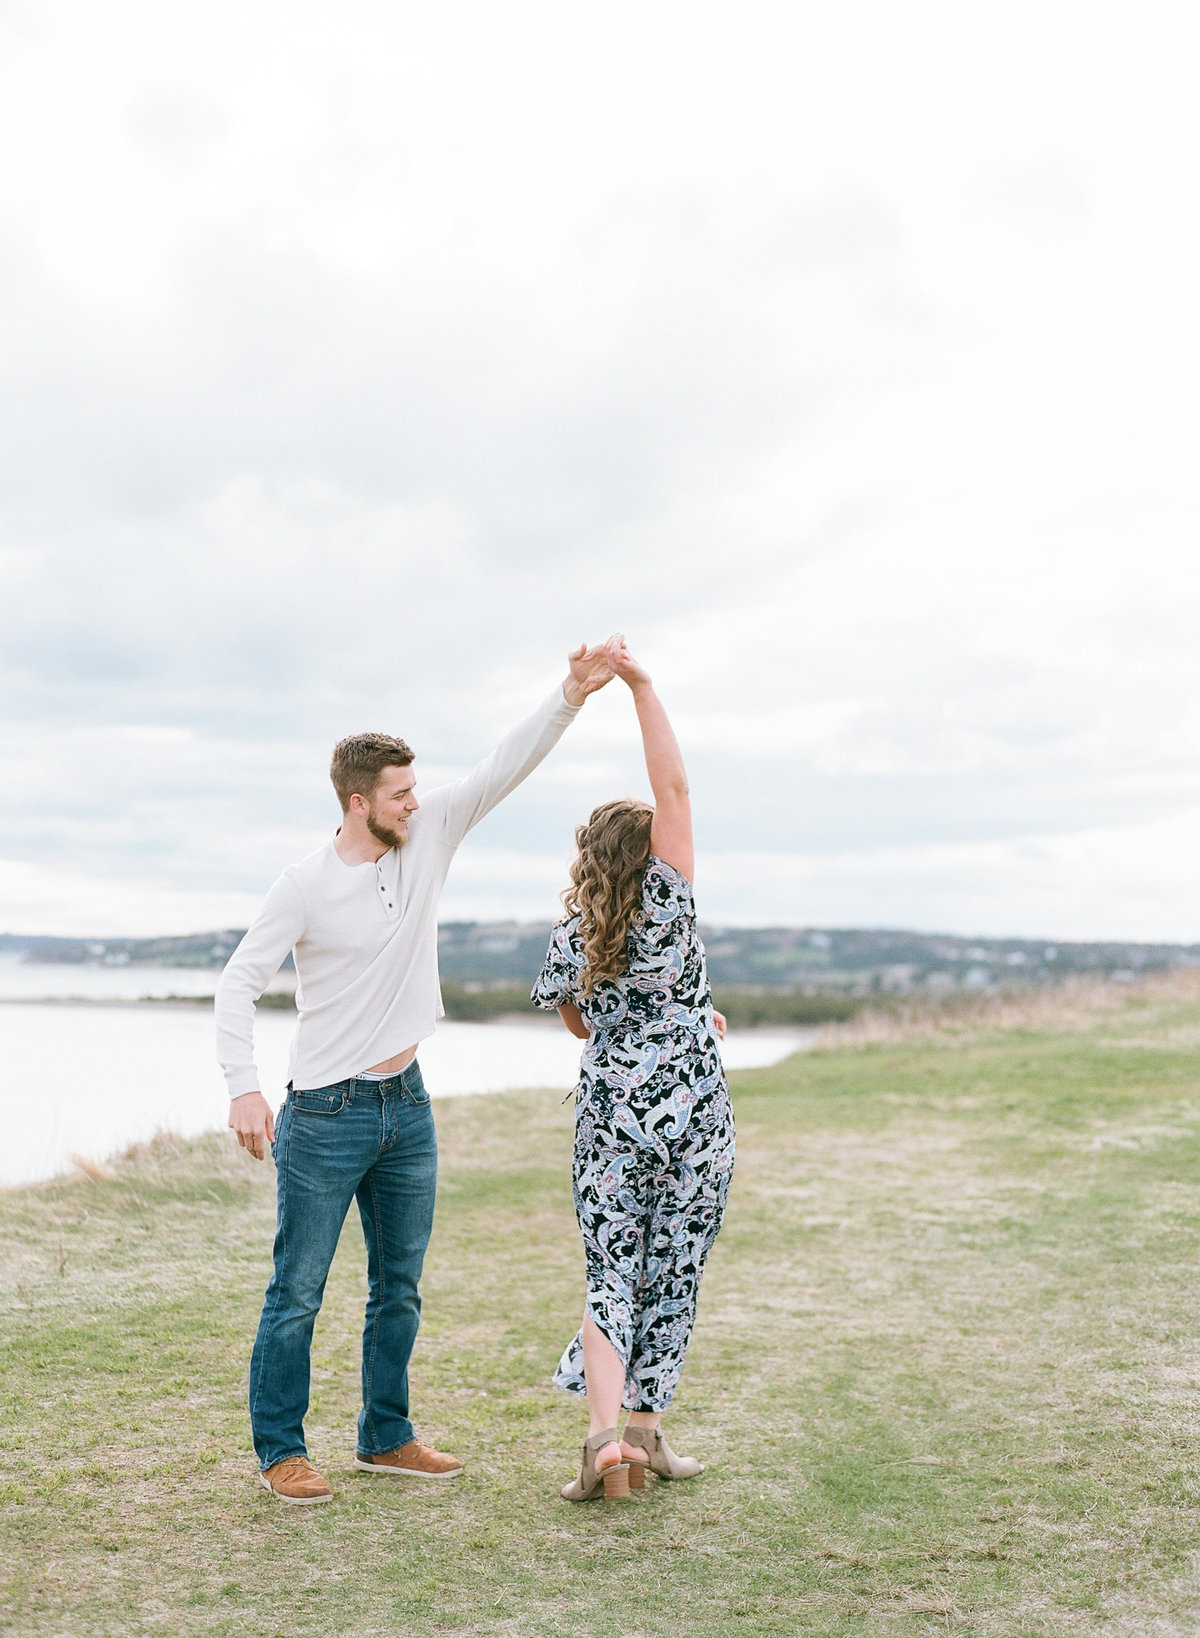 Jacqueline Anne Photography - Akayla and Andrew - Lawrencetown Beach-42